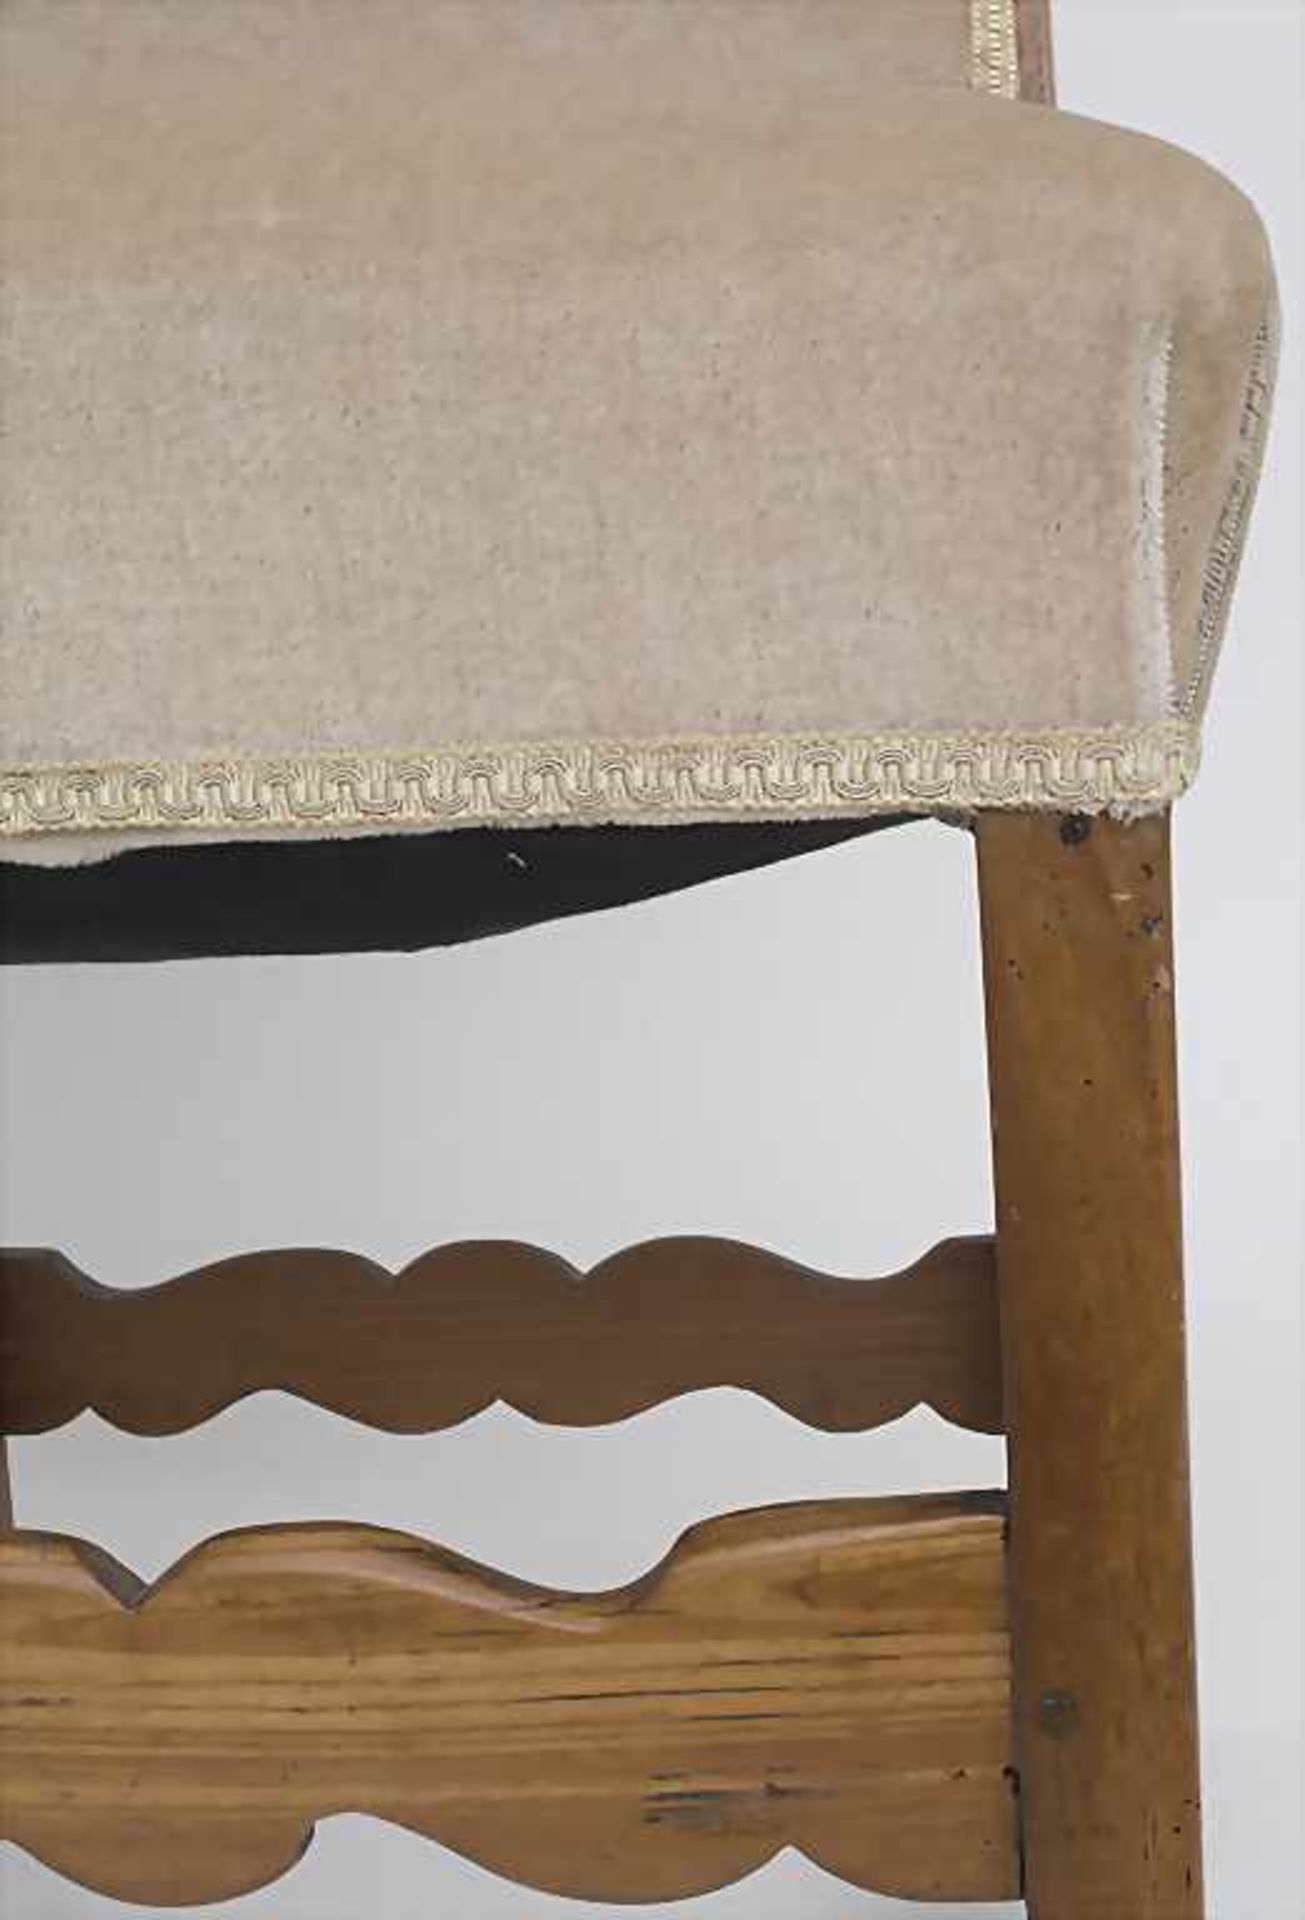 Stuhl mit Veloursbezug / A chair with velour cover - Image 4 of 4